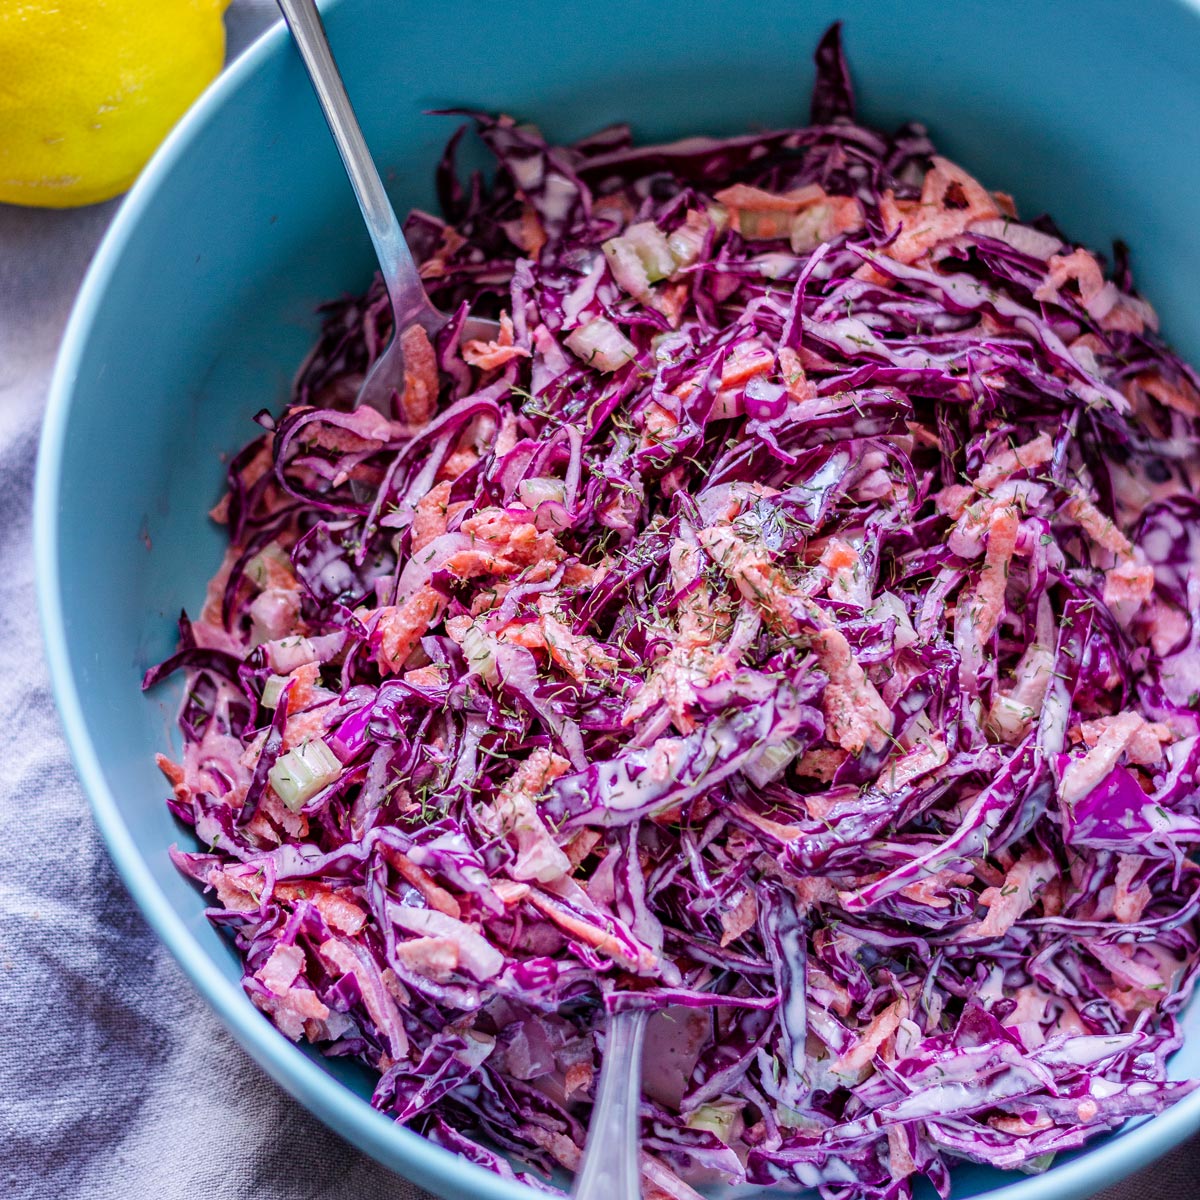 Creamy Red Cabbage Coleslaw Recipe Happy Foods Tube,Thermofoil Cabinets Peeling